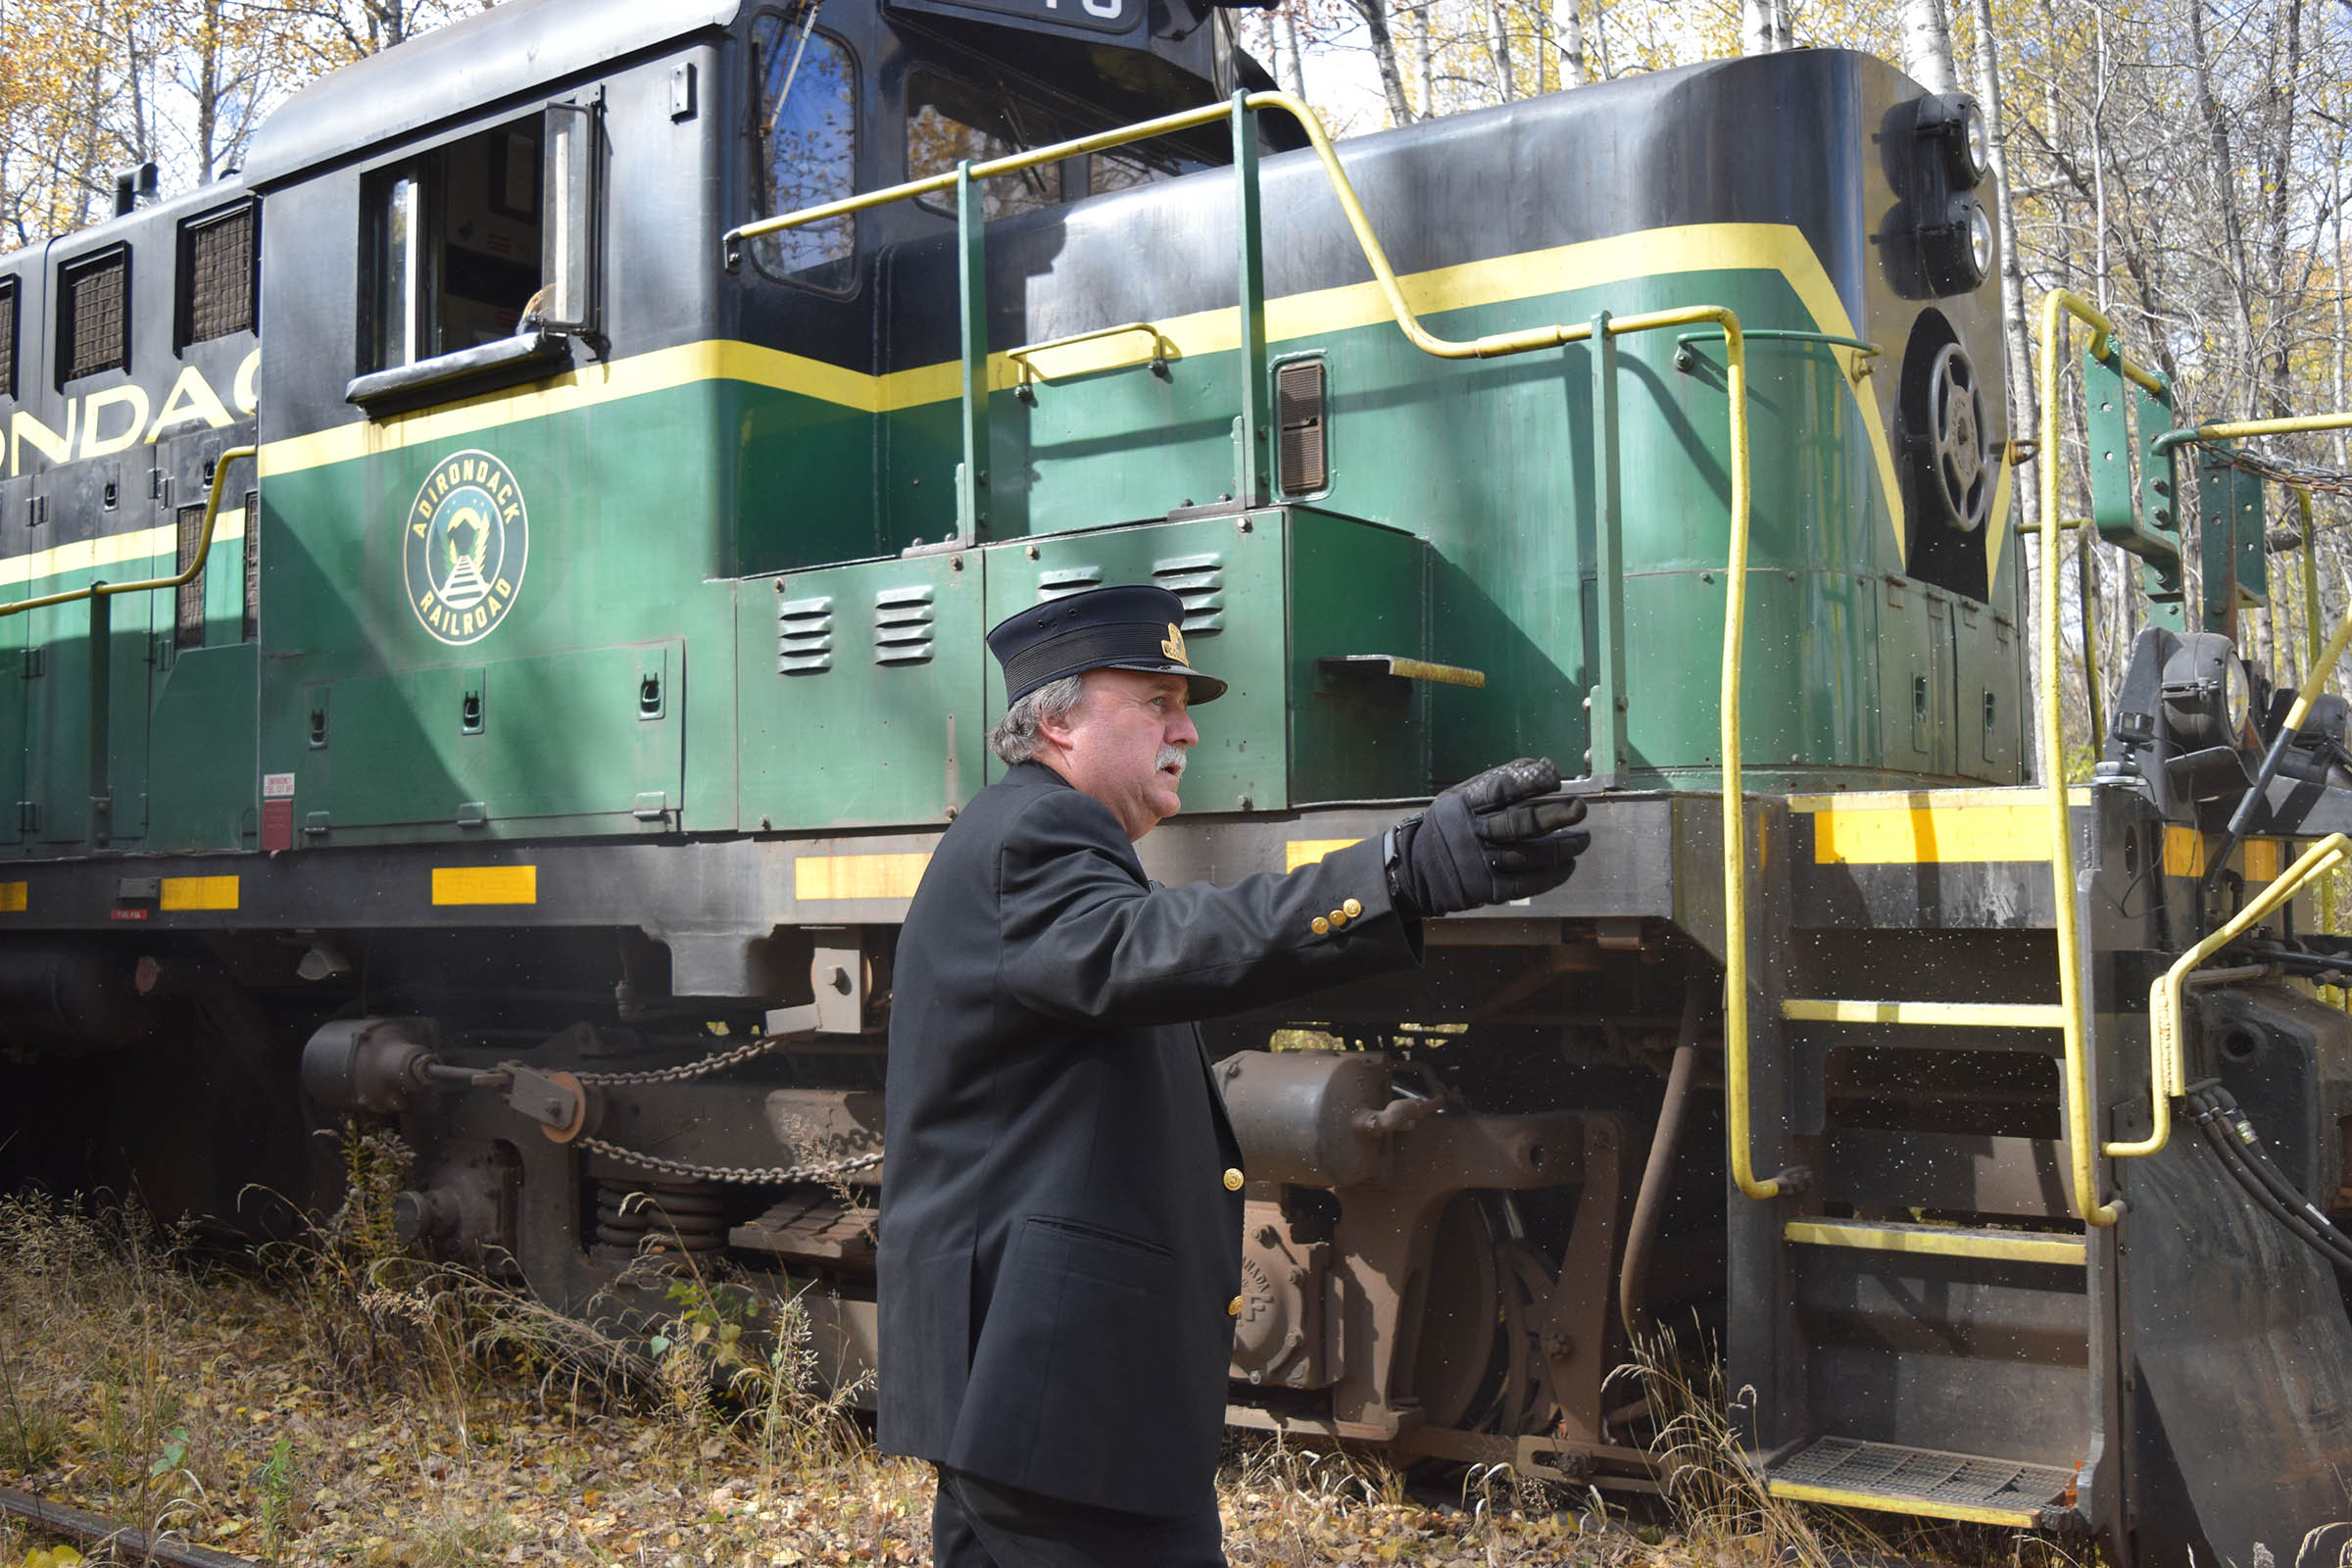 ‘Junction Function’ welcomes rail passengers to Tupper Lake | News, Sports, Jobs